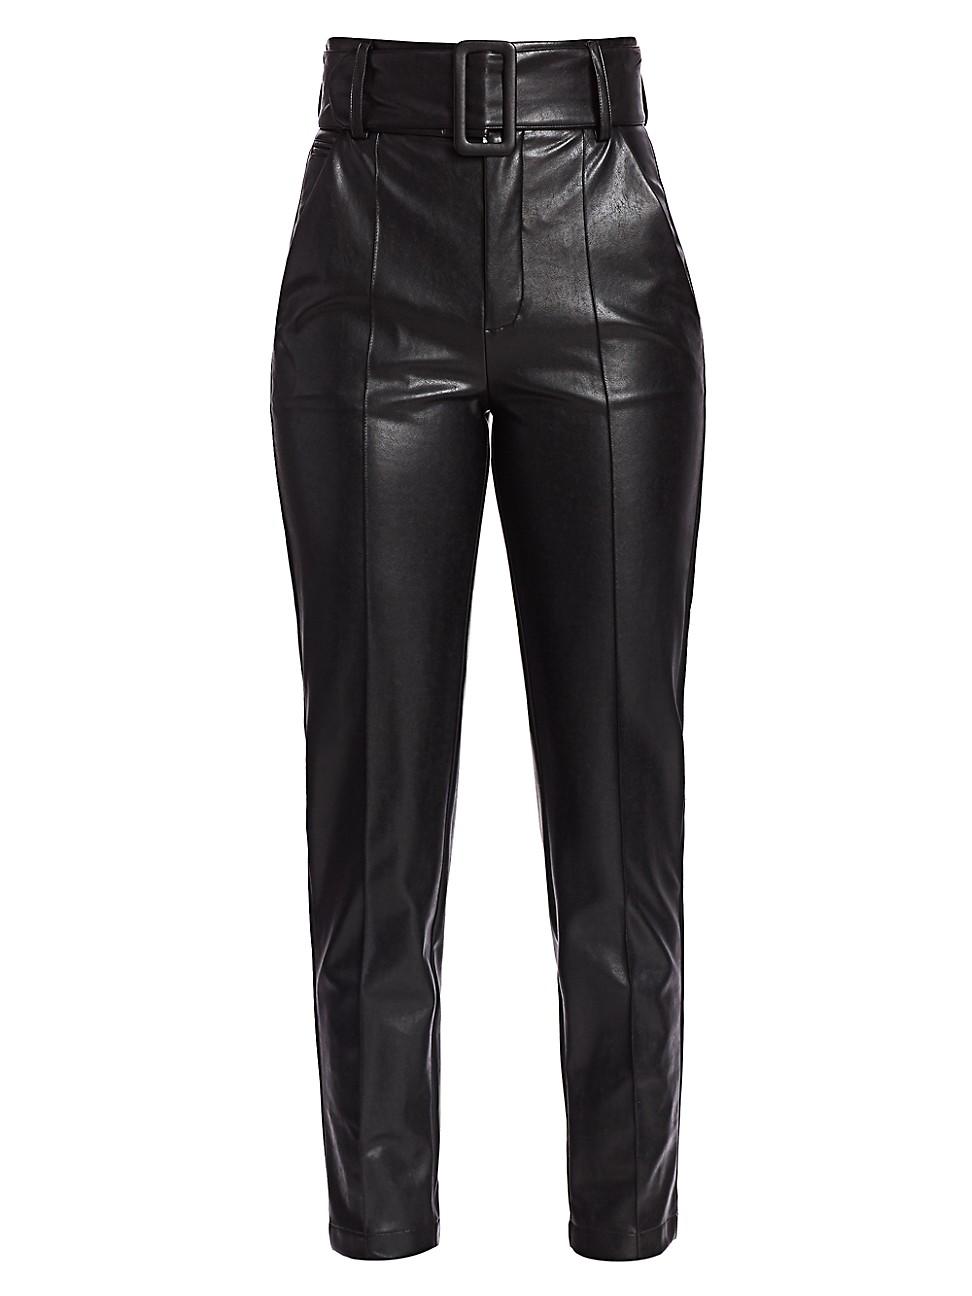 Top more than 71 high waisted black leather pants latest - in.eteachers